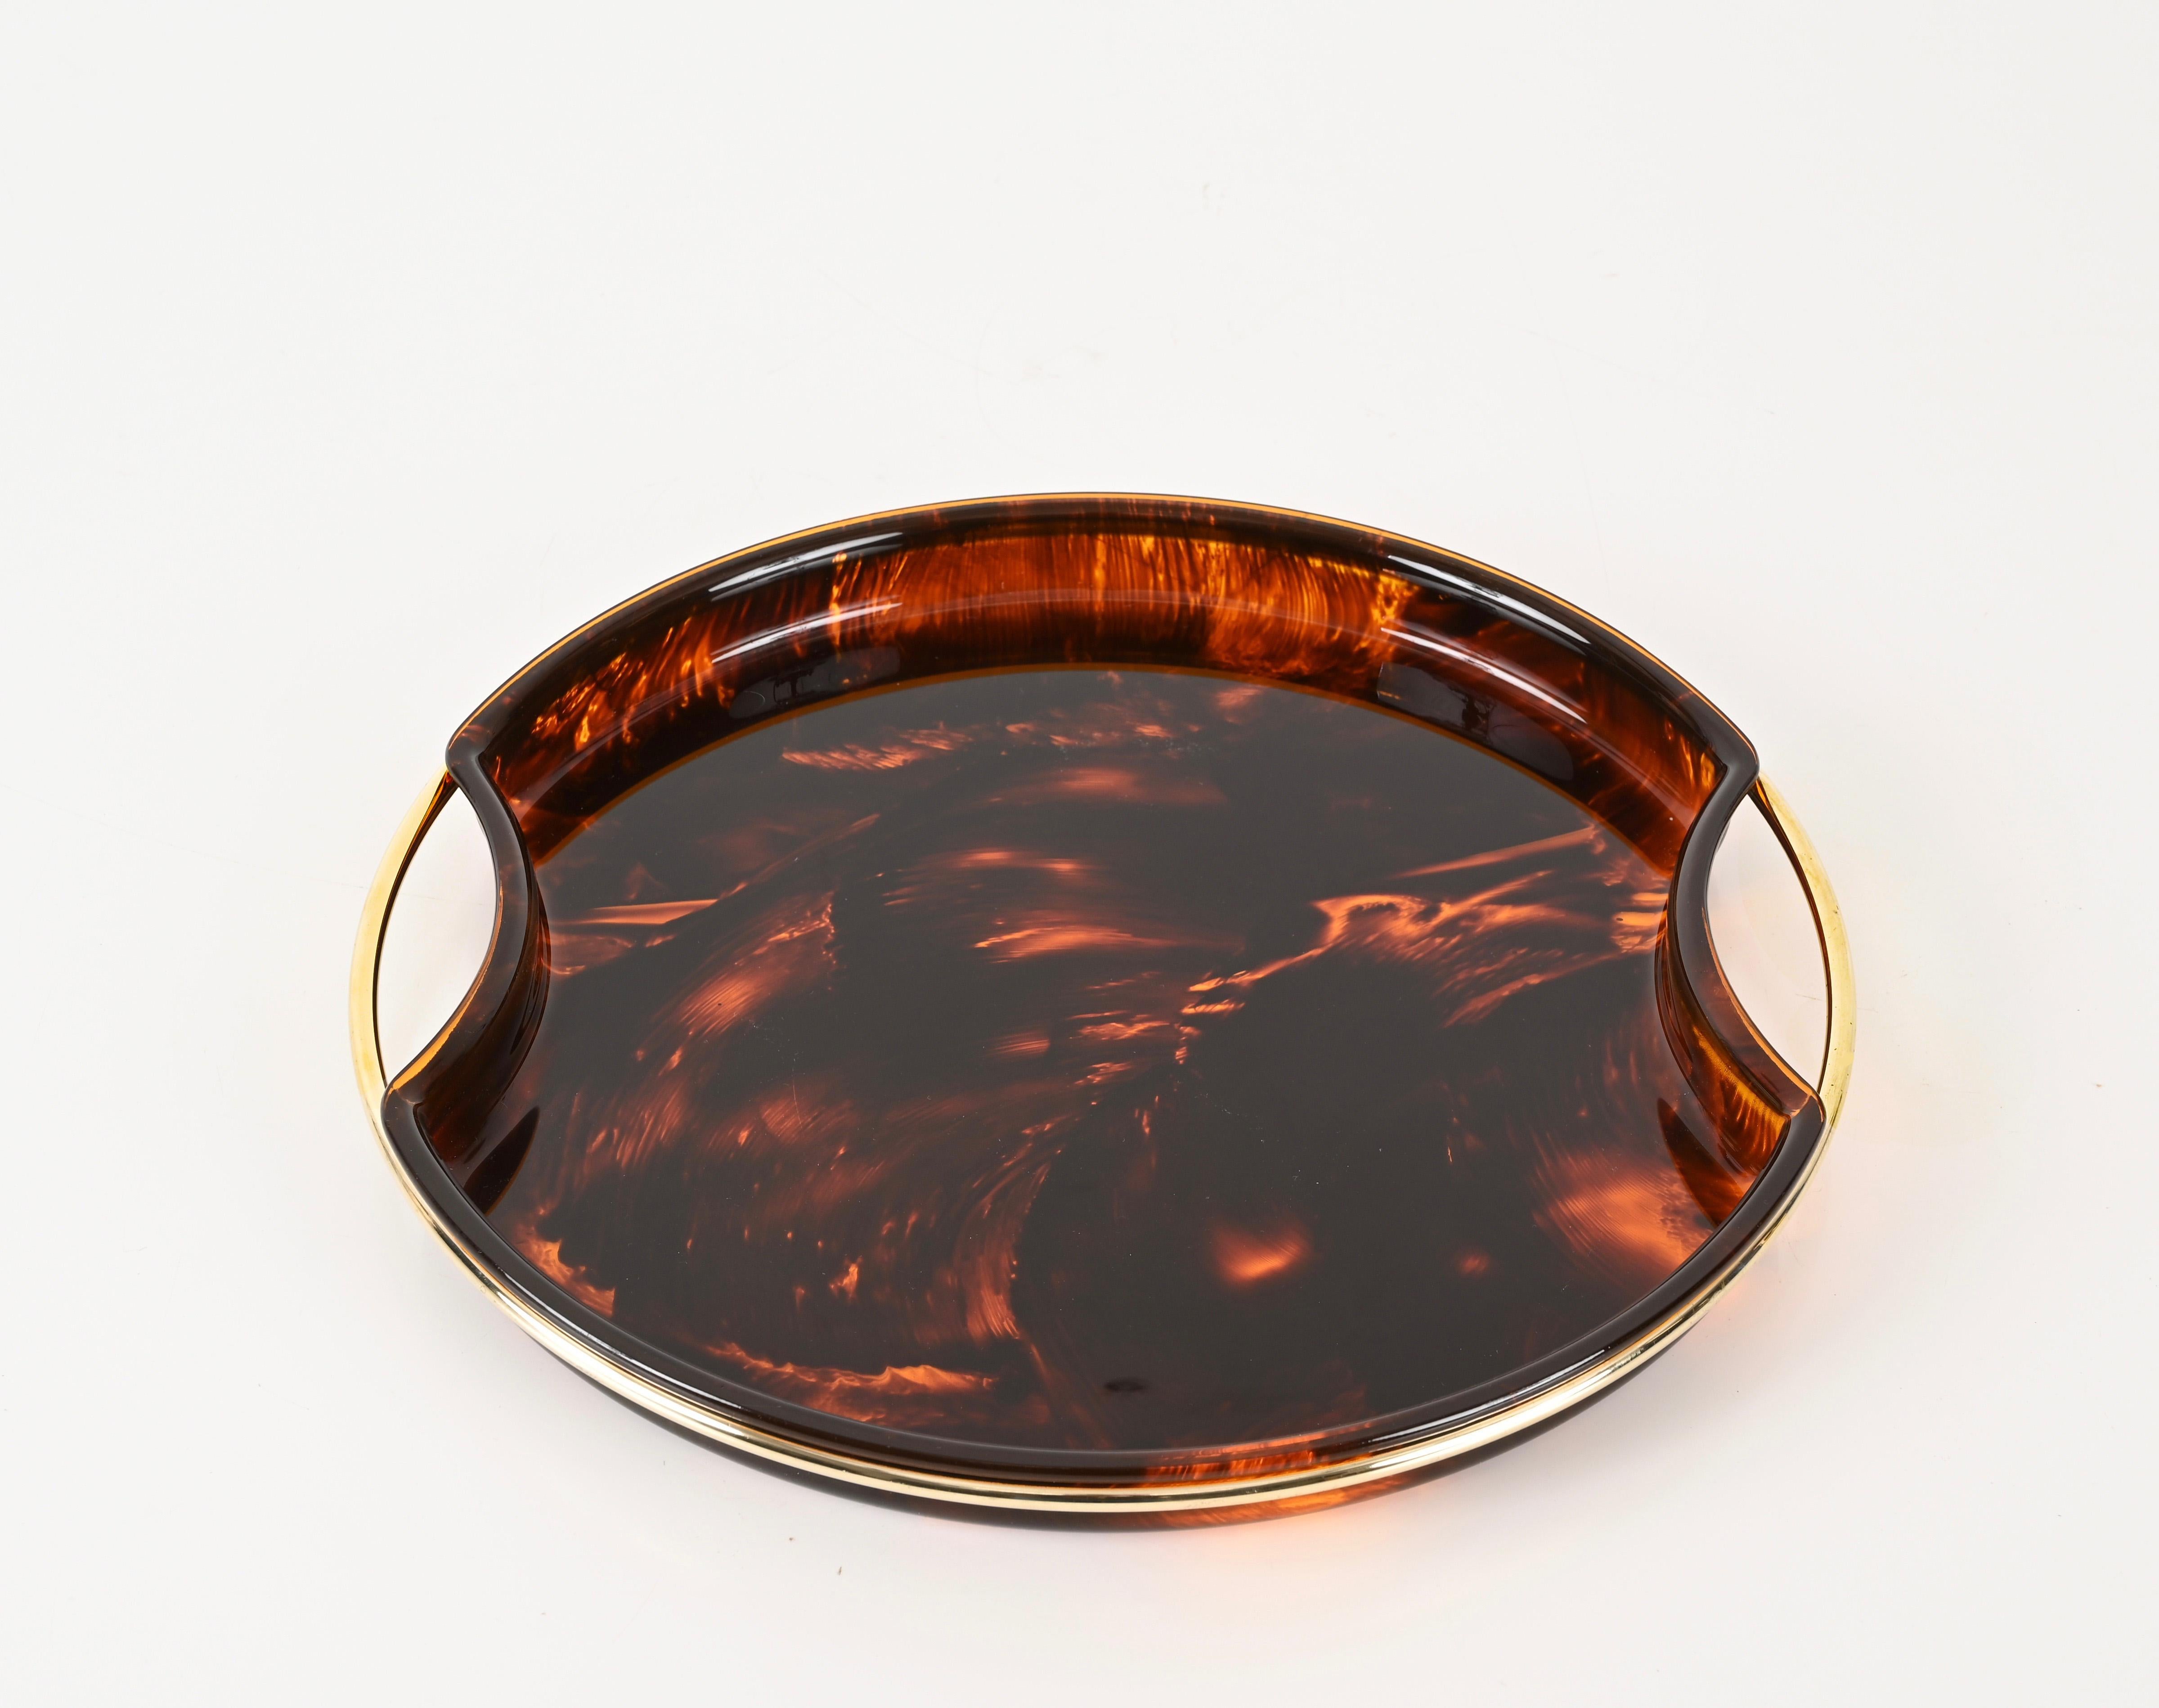 20th Century Mid-Century Tortoiseshell Lucite and Brass Serving Tray by Guzzini, Italy 1970s For Sale